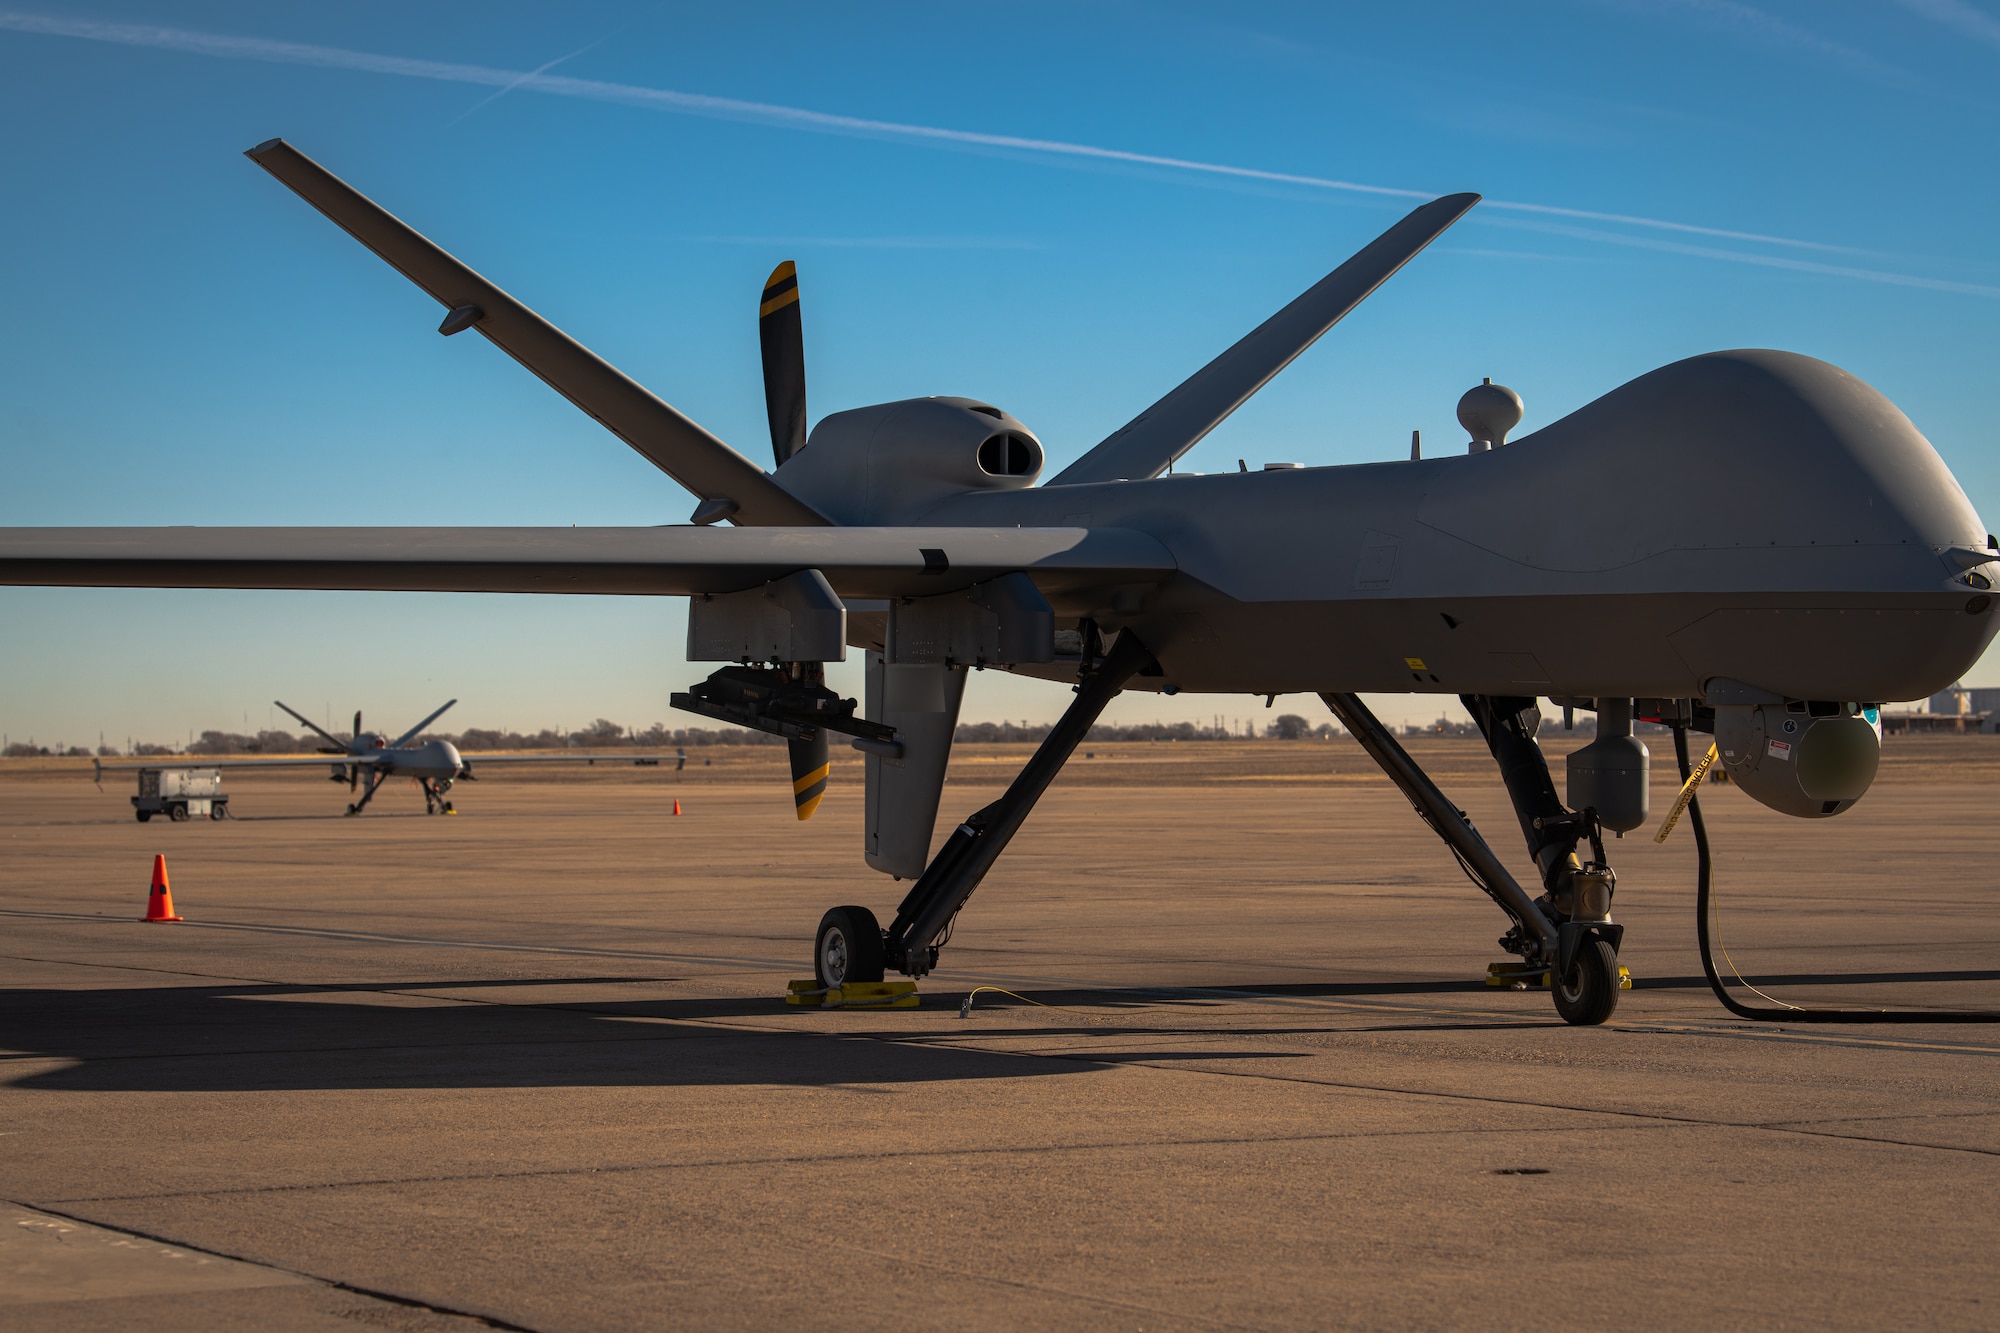 Two MQ-9A Reaper remotely piloted aircraft operated by the 3rd Special Operations Squadron undergo pre-flight checks before an experimental multi-aircraft control flight for the Adaptive Airborne Enterprise (A2E) at Cannon Air Force Base, N.M., Dec. 6, 2023. MQ-9 units will leverage multiple platforms and later incorporate autonomy to deliver capabilities to special operations forces and the joint force across the spectrum of operations (U.S. Air Force photo by Staff Sgt. Vernon R. Walter III) (This photo has been edited for security purposes by blurring out aircraft information)